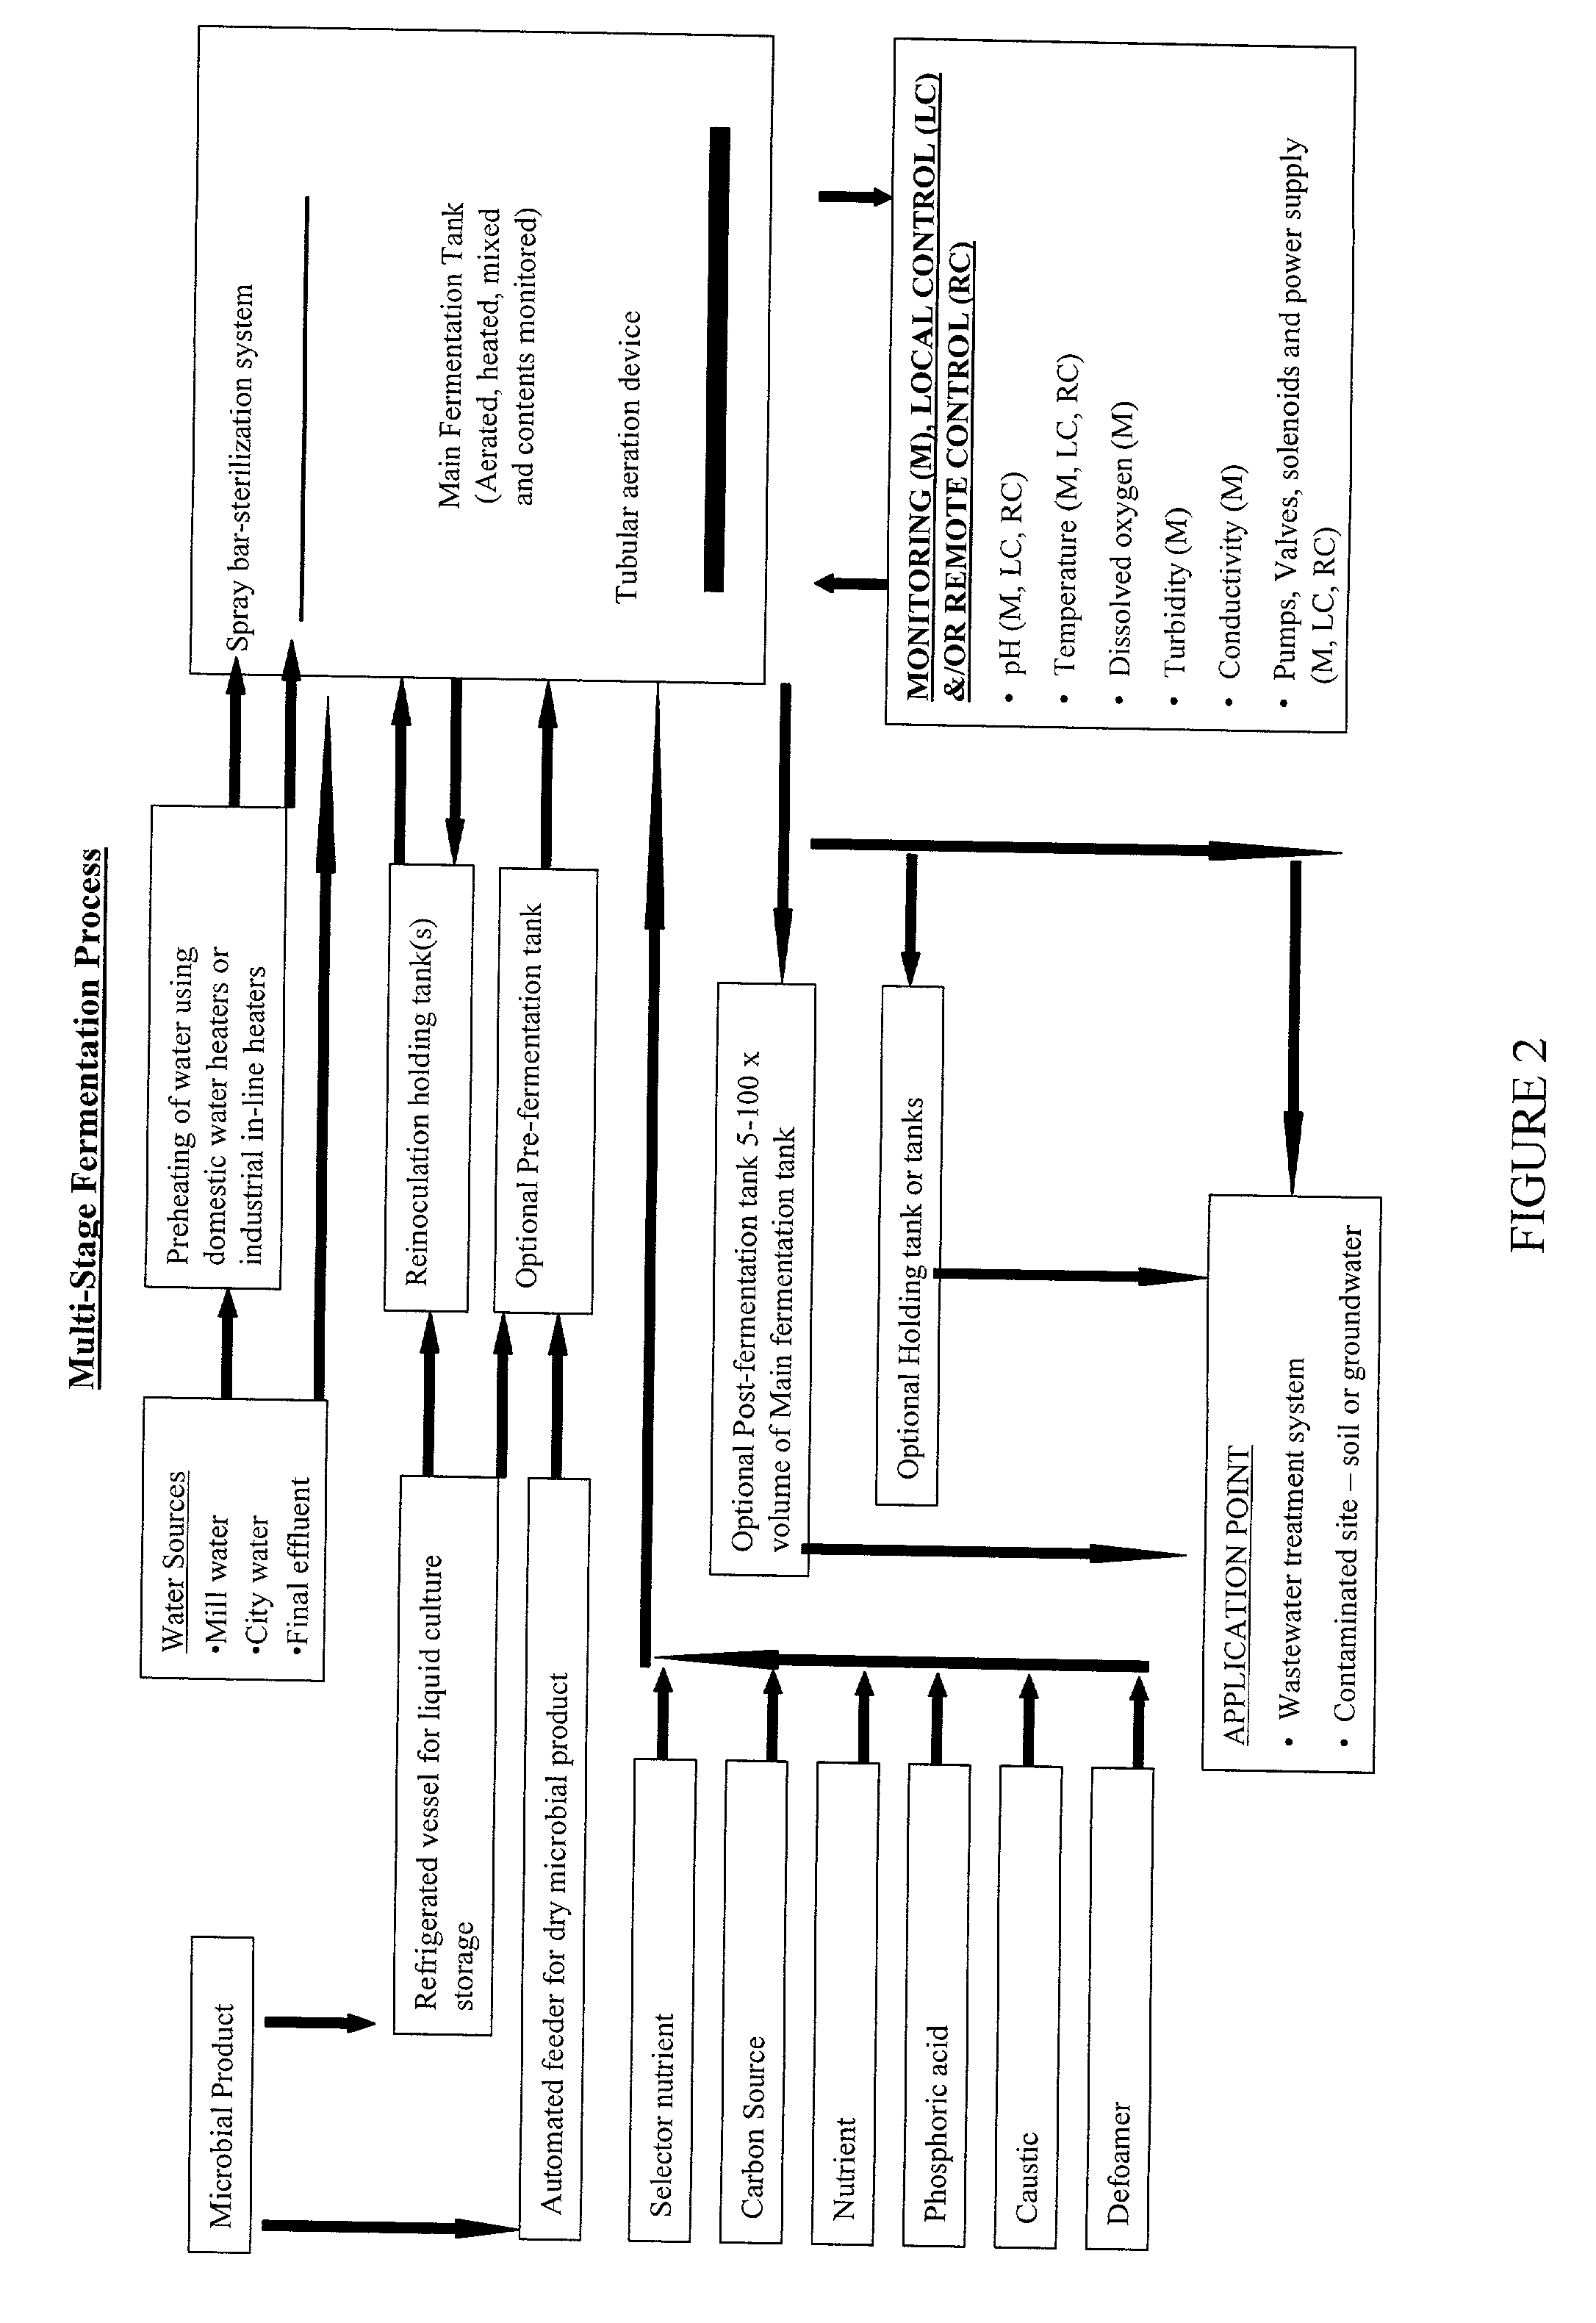 Fermentation systems, methods, and apparatus